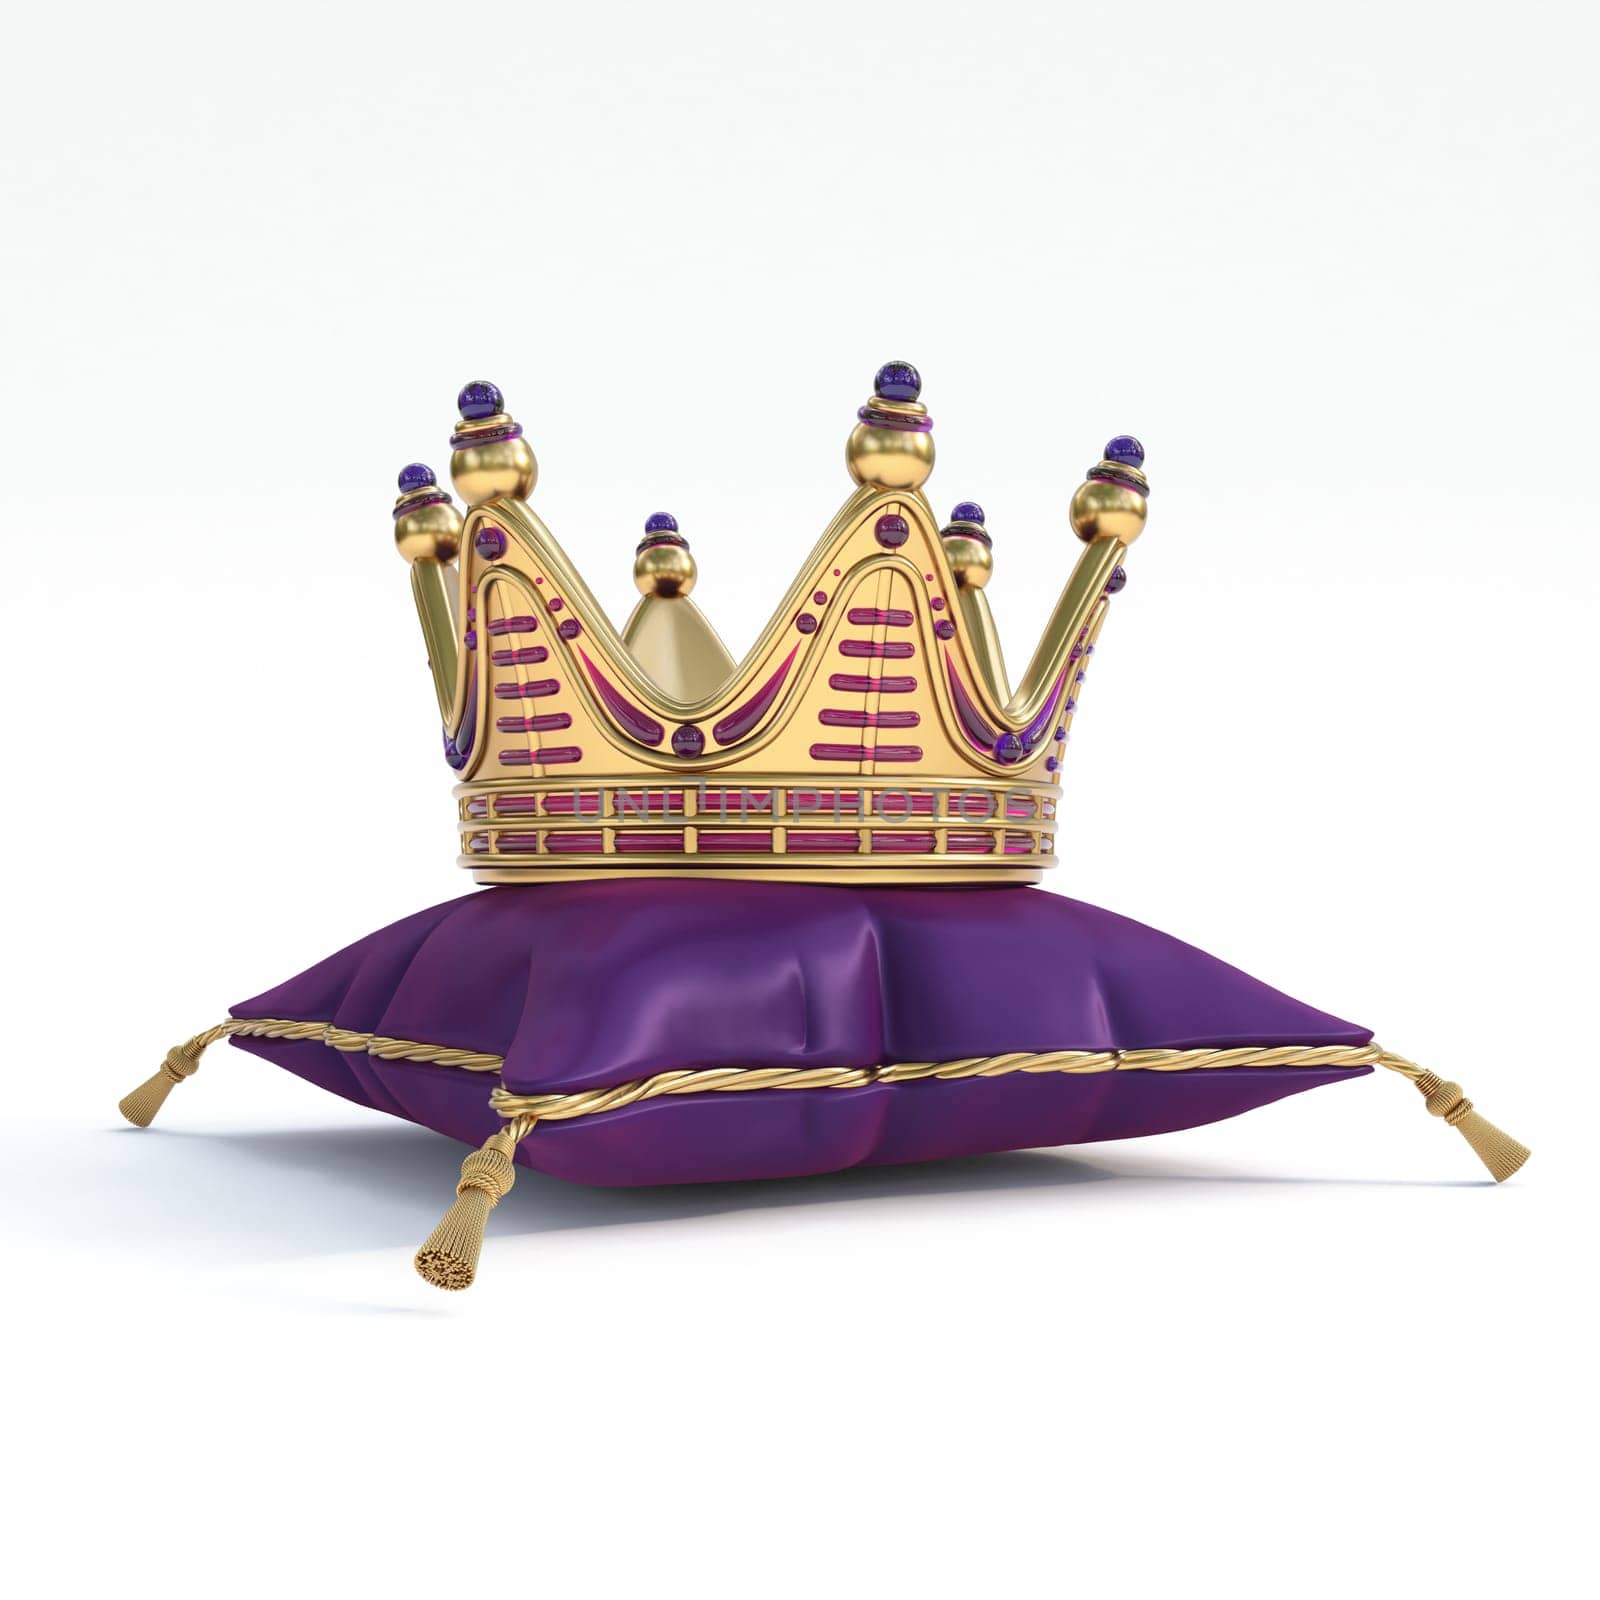 Golden crown with purple gemstones  on pillow 3D rendering illustration isolated on white background